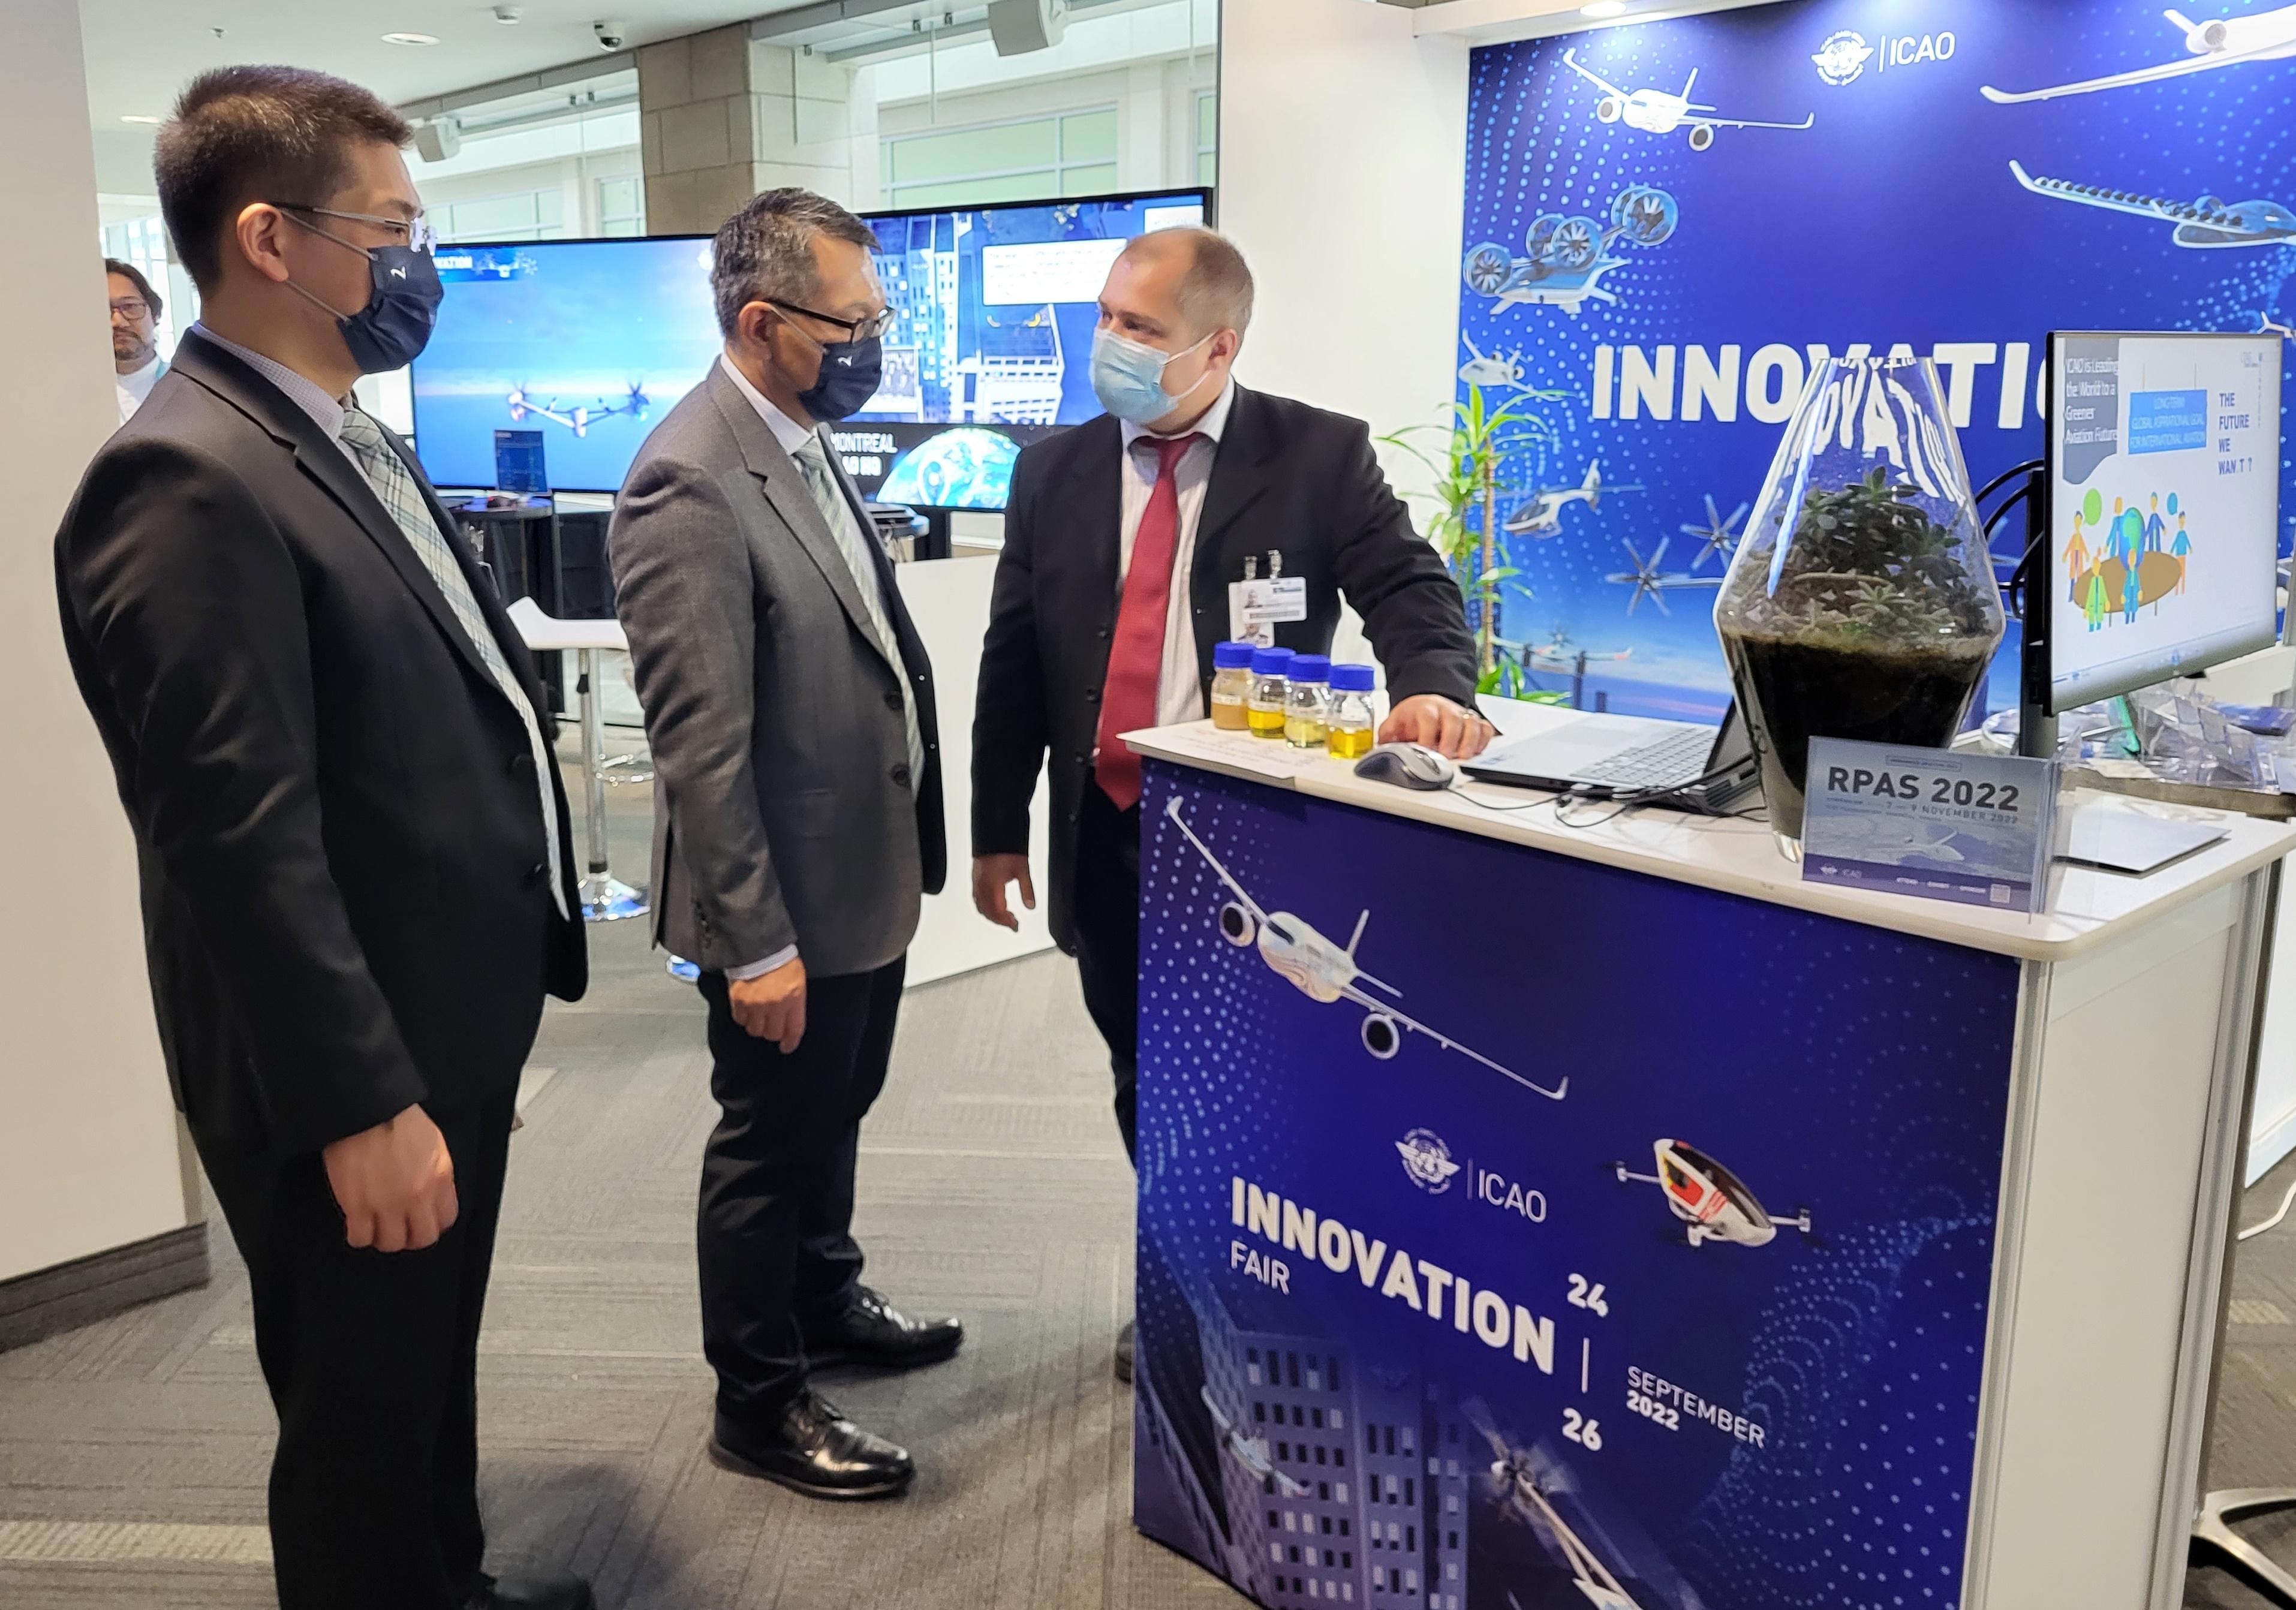 The Director-General of Civil Aviation, Mr Victor Liu (second right), attended the International Civil Aviation Organization (ICAO) Innovation Fair 2022 before attending the 41st ICAO Assembly in Montreal, Canada. Photo shows Mr Liu visiting an exhibition booth in the Fair to gain an insight into the latest innovative technologies of the aviation industry.